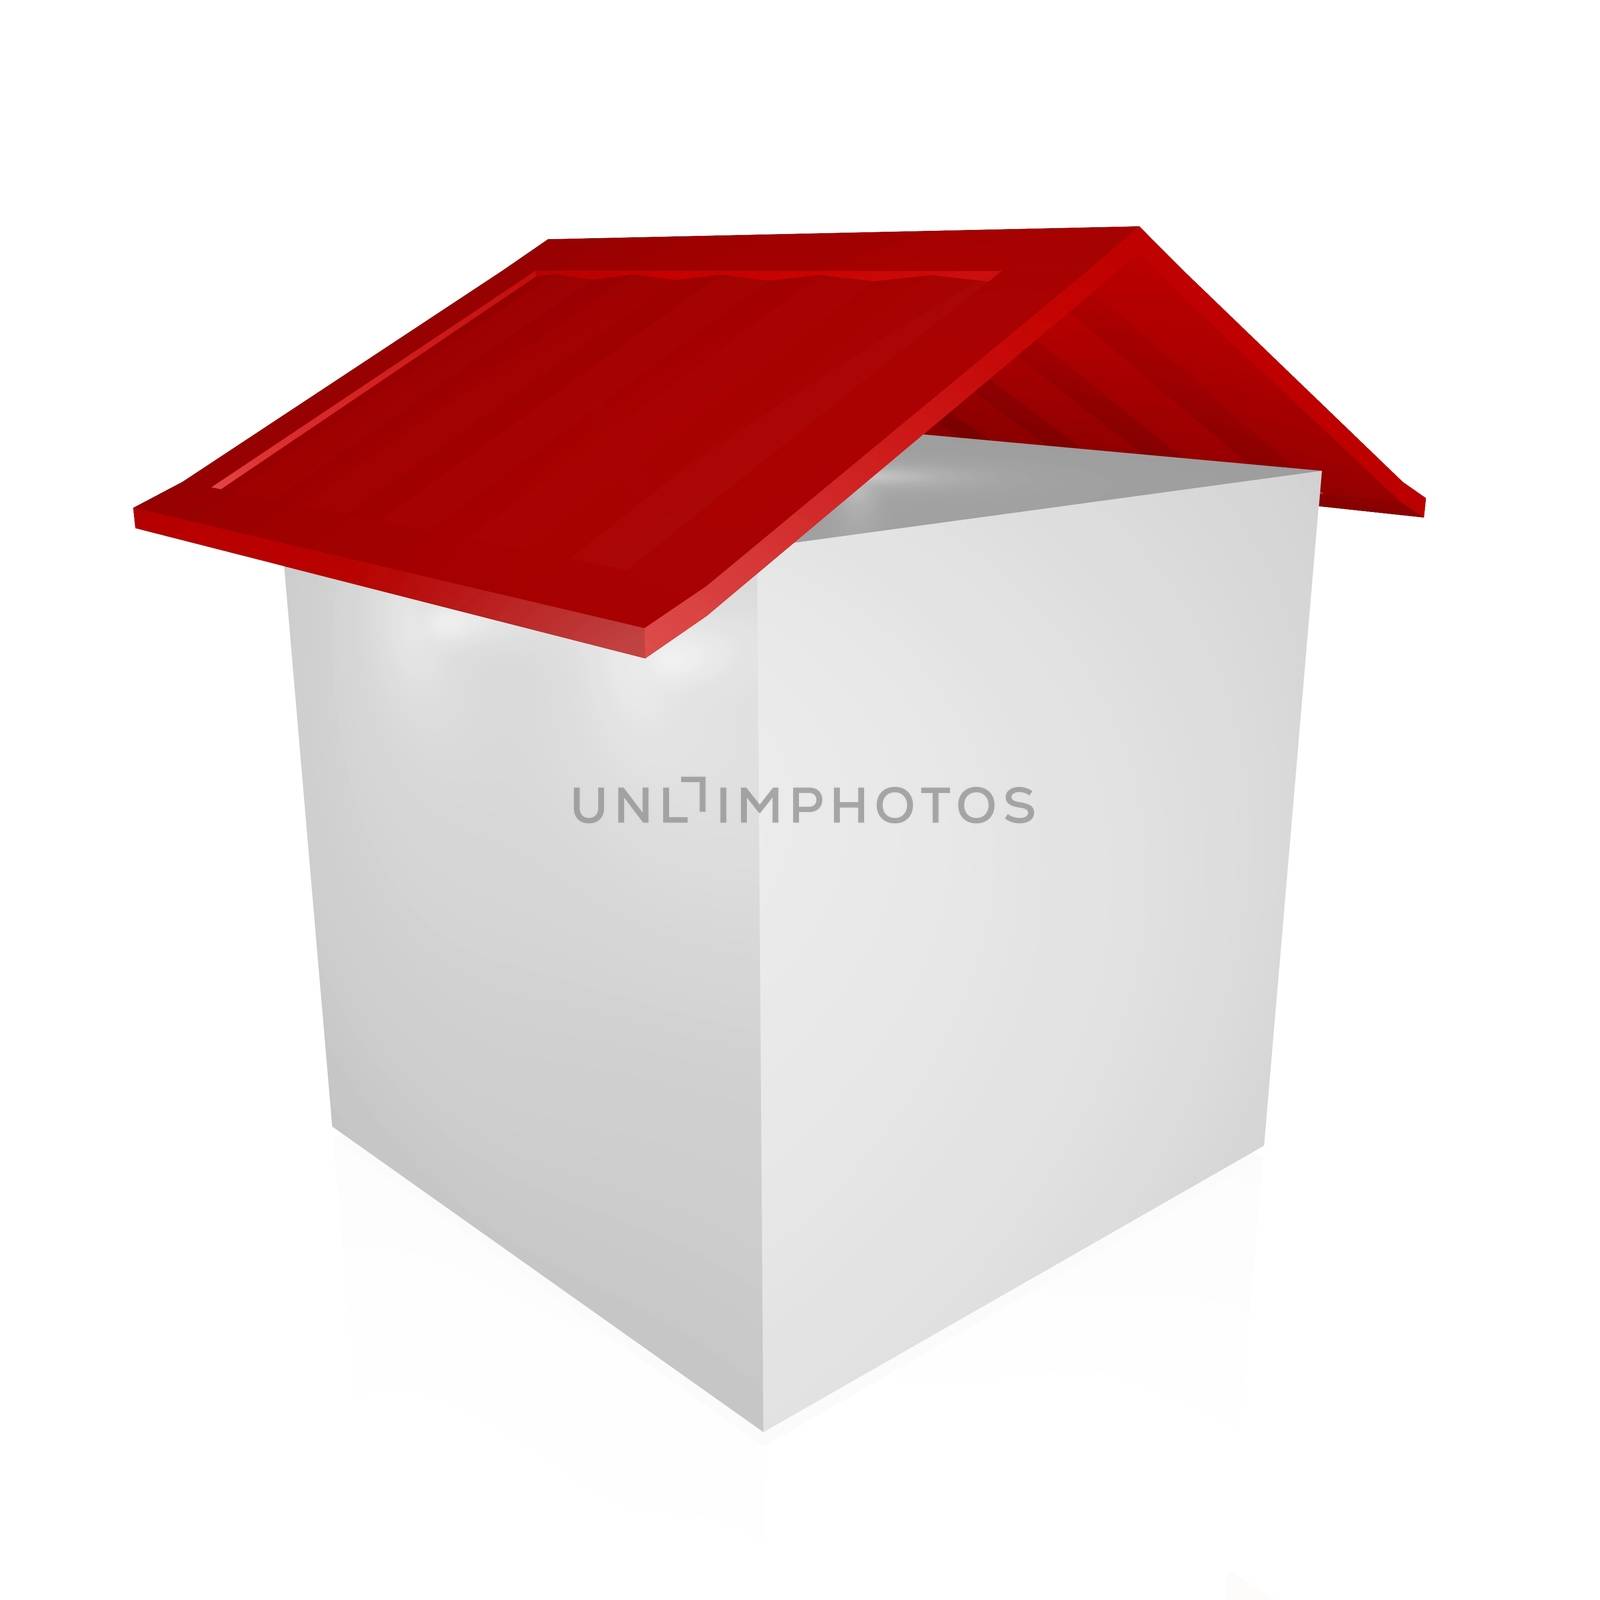 House made with a simple white cube and a red slanting roof. Ideal for housing finance, real estate, home loans and mortgage concepts
